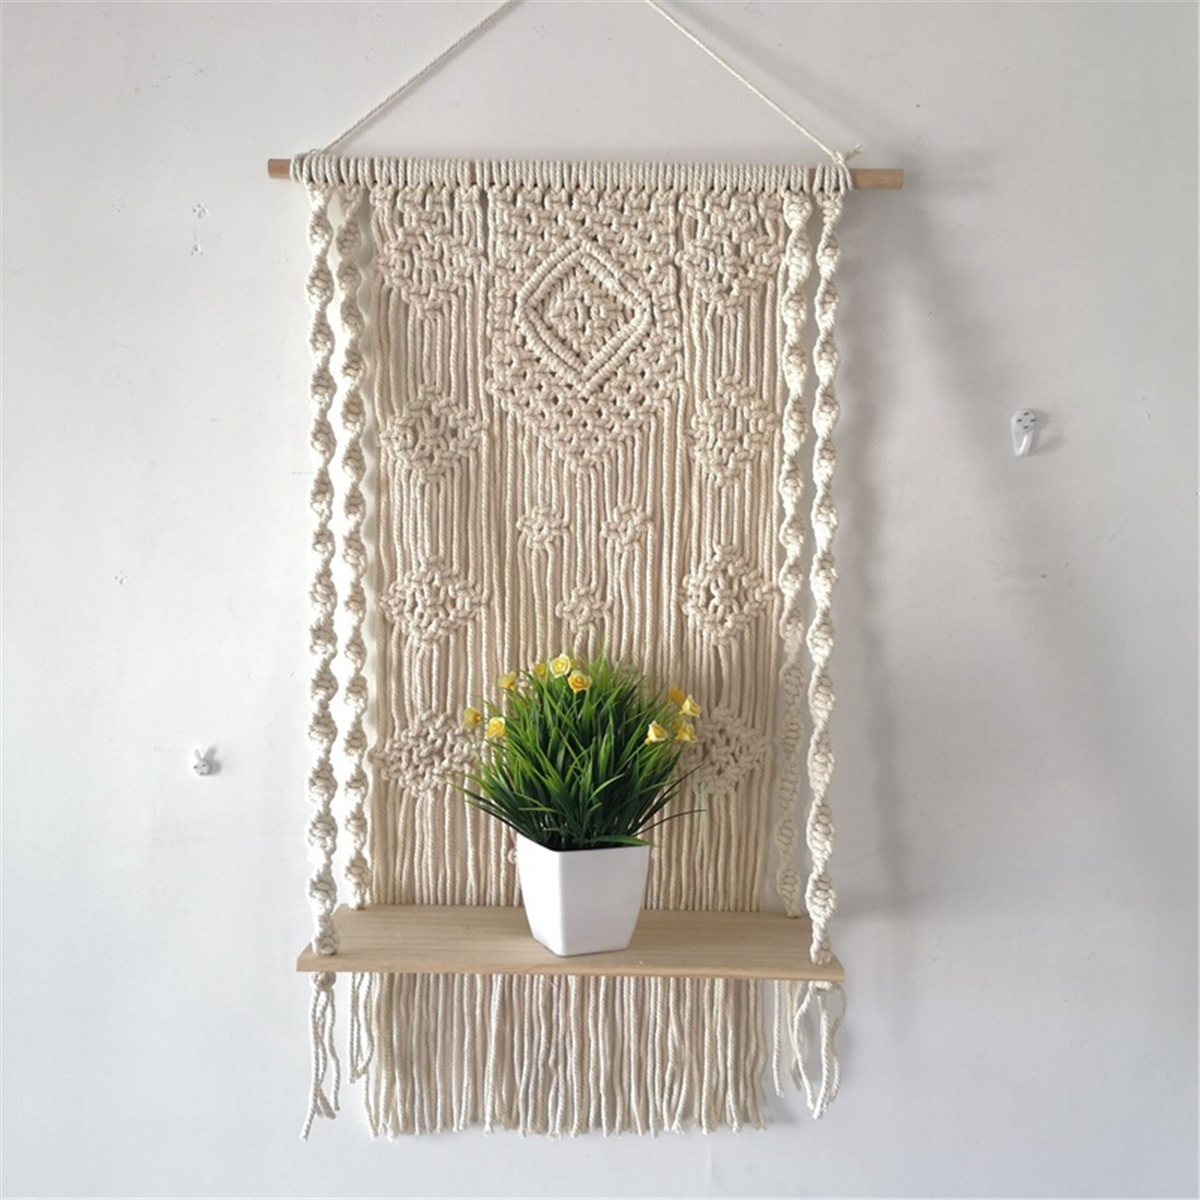 Wall-Hanging-Rack-Macrame-Knitted-Rope-Woven-Tassel-Wall-Hanging-Handmade-Tapestry-Display-Stand-Hom-1795856-2